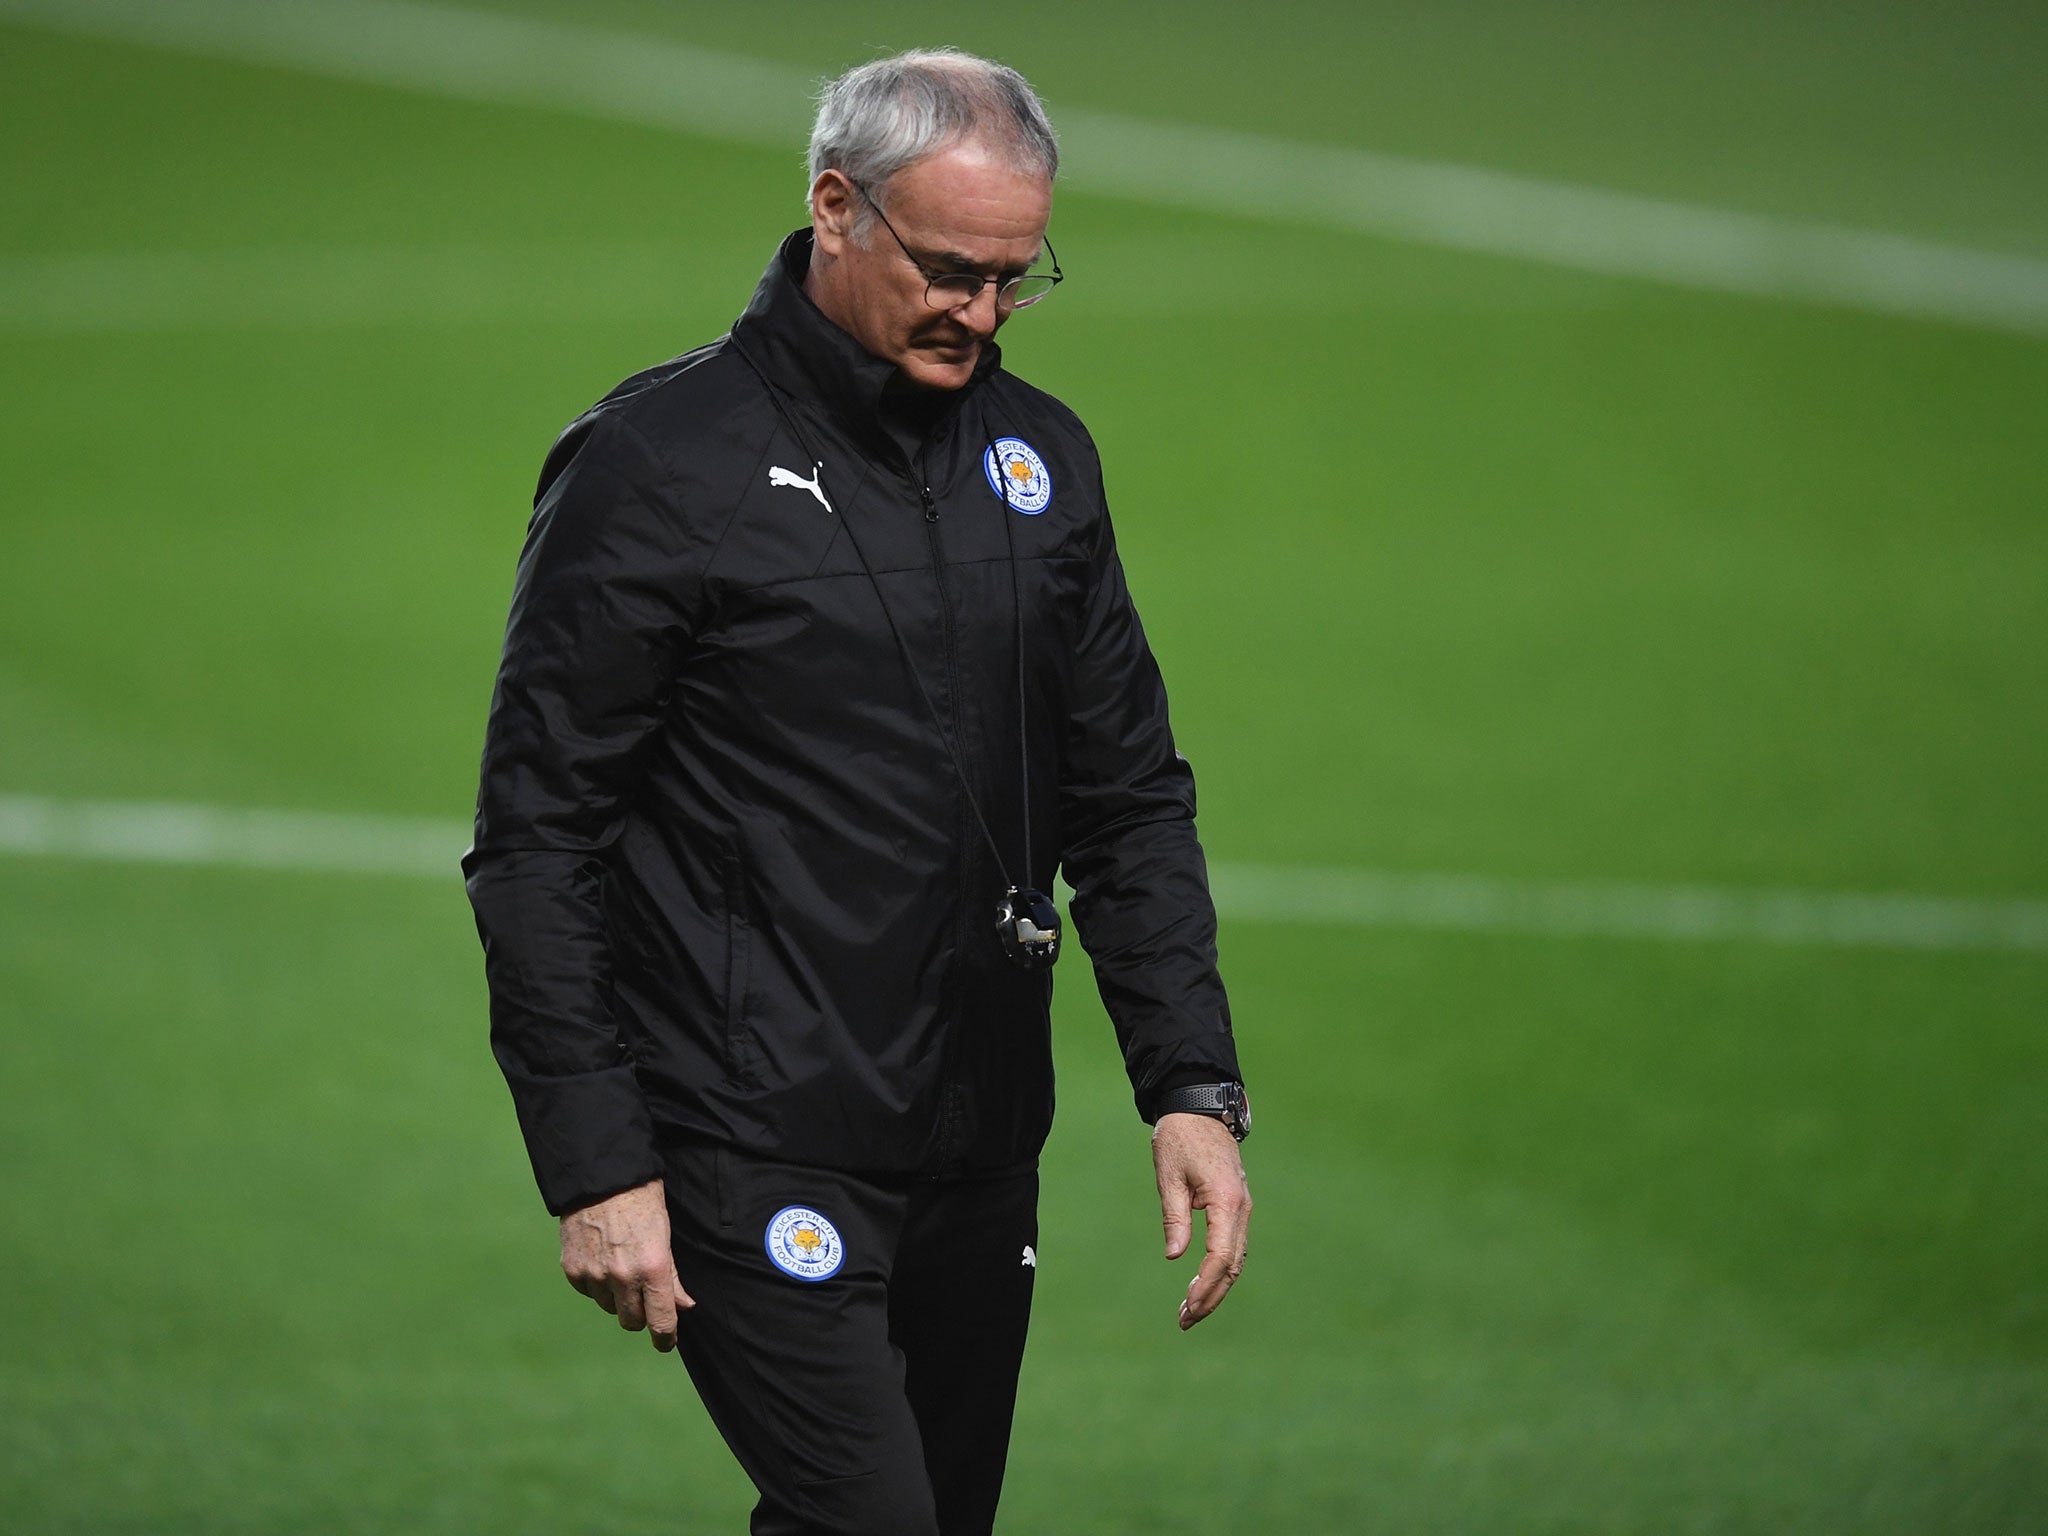 Ranieri was dismissed 298 days after lifting the Premier League